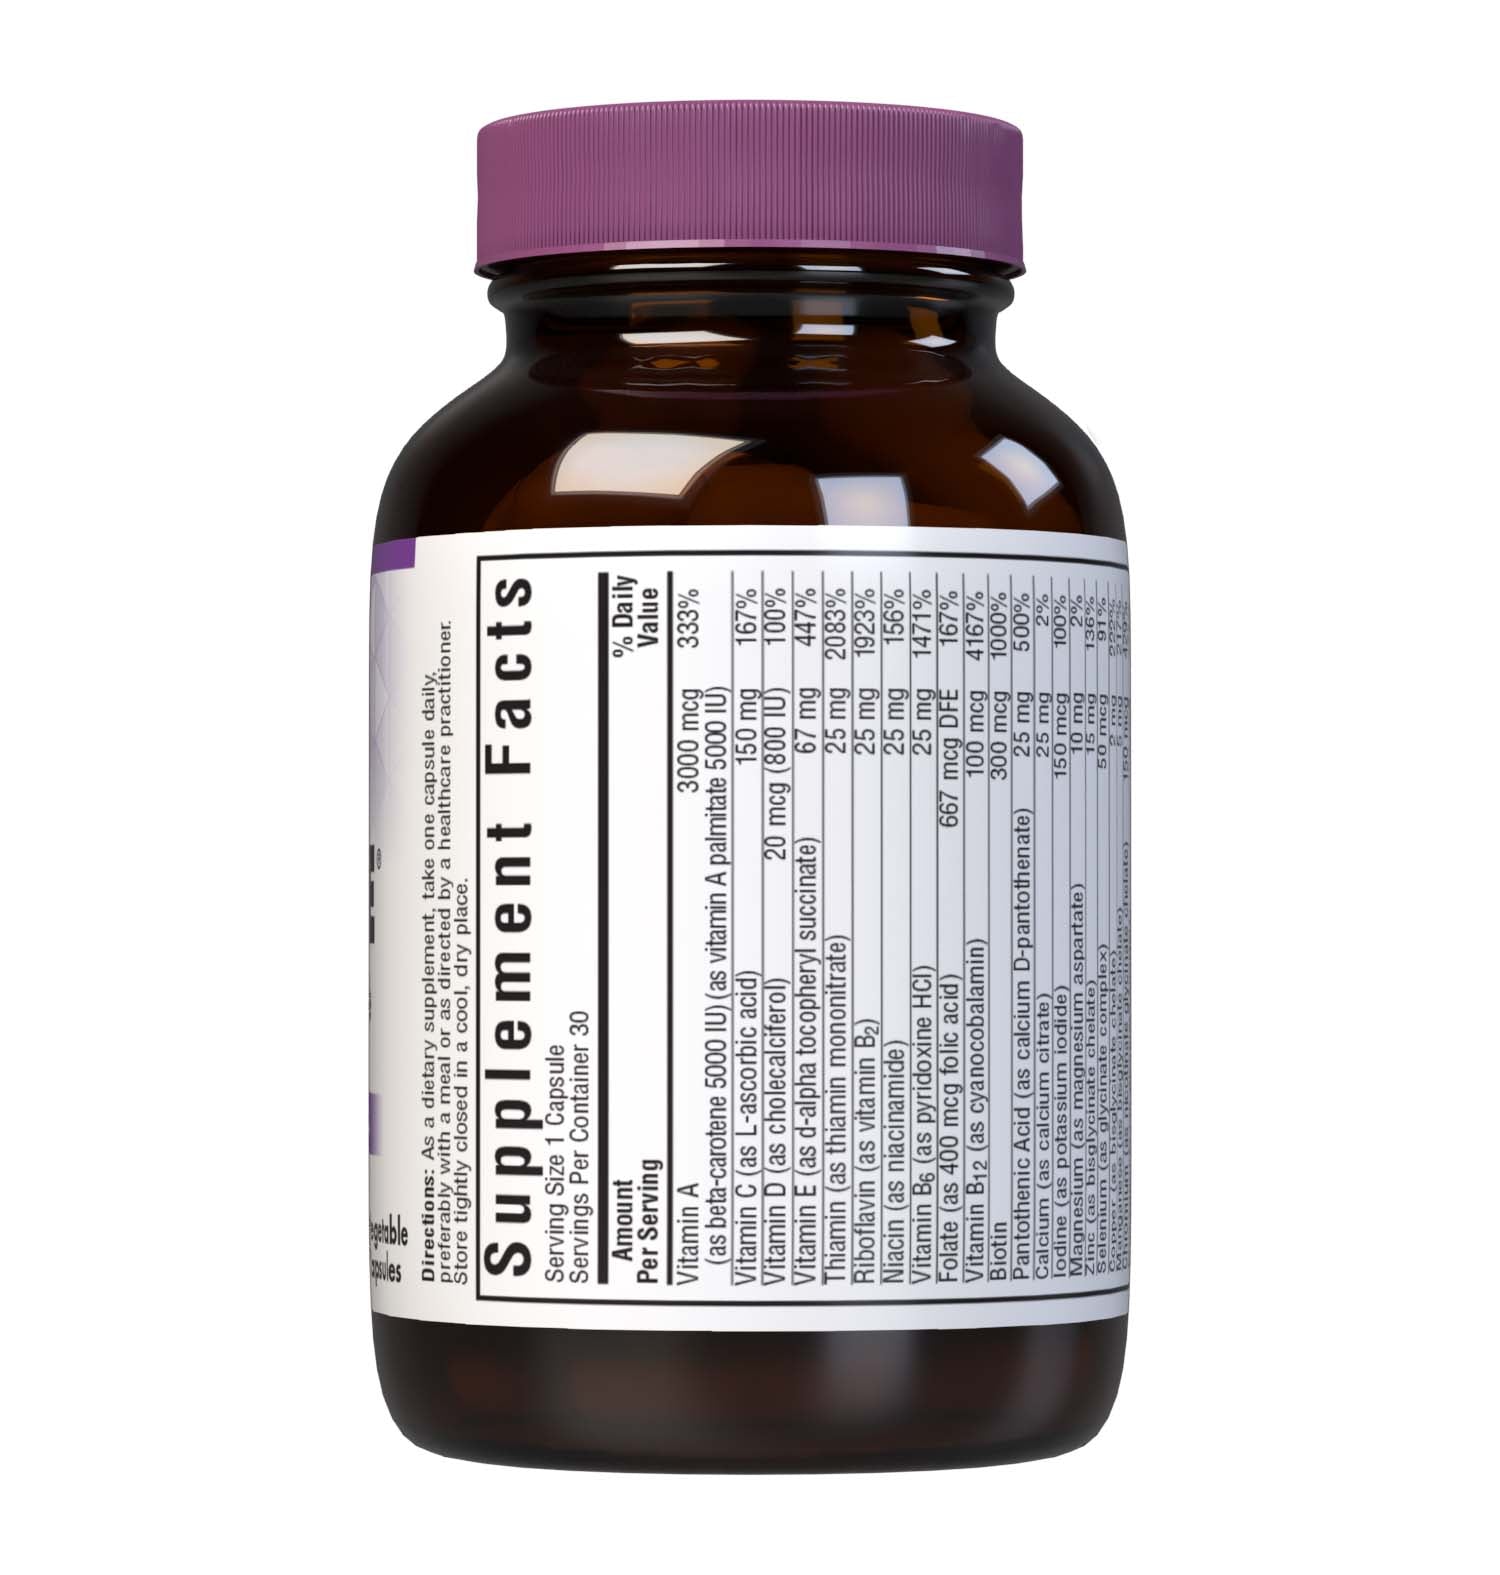 Bluebonnet’s Multi One Iron-free Single Daily Multiple 30 vegetable capsules is formulated with crucial vitamins and minerals, plus Albion chelated minerals for daily nutrition and well being. Supplement fact panel. #size_30 count